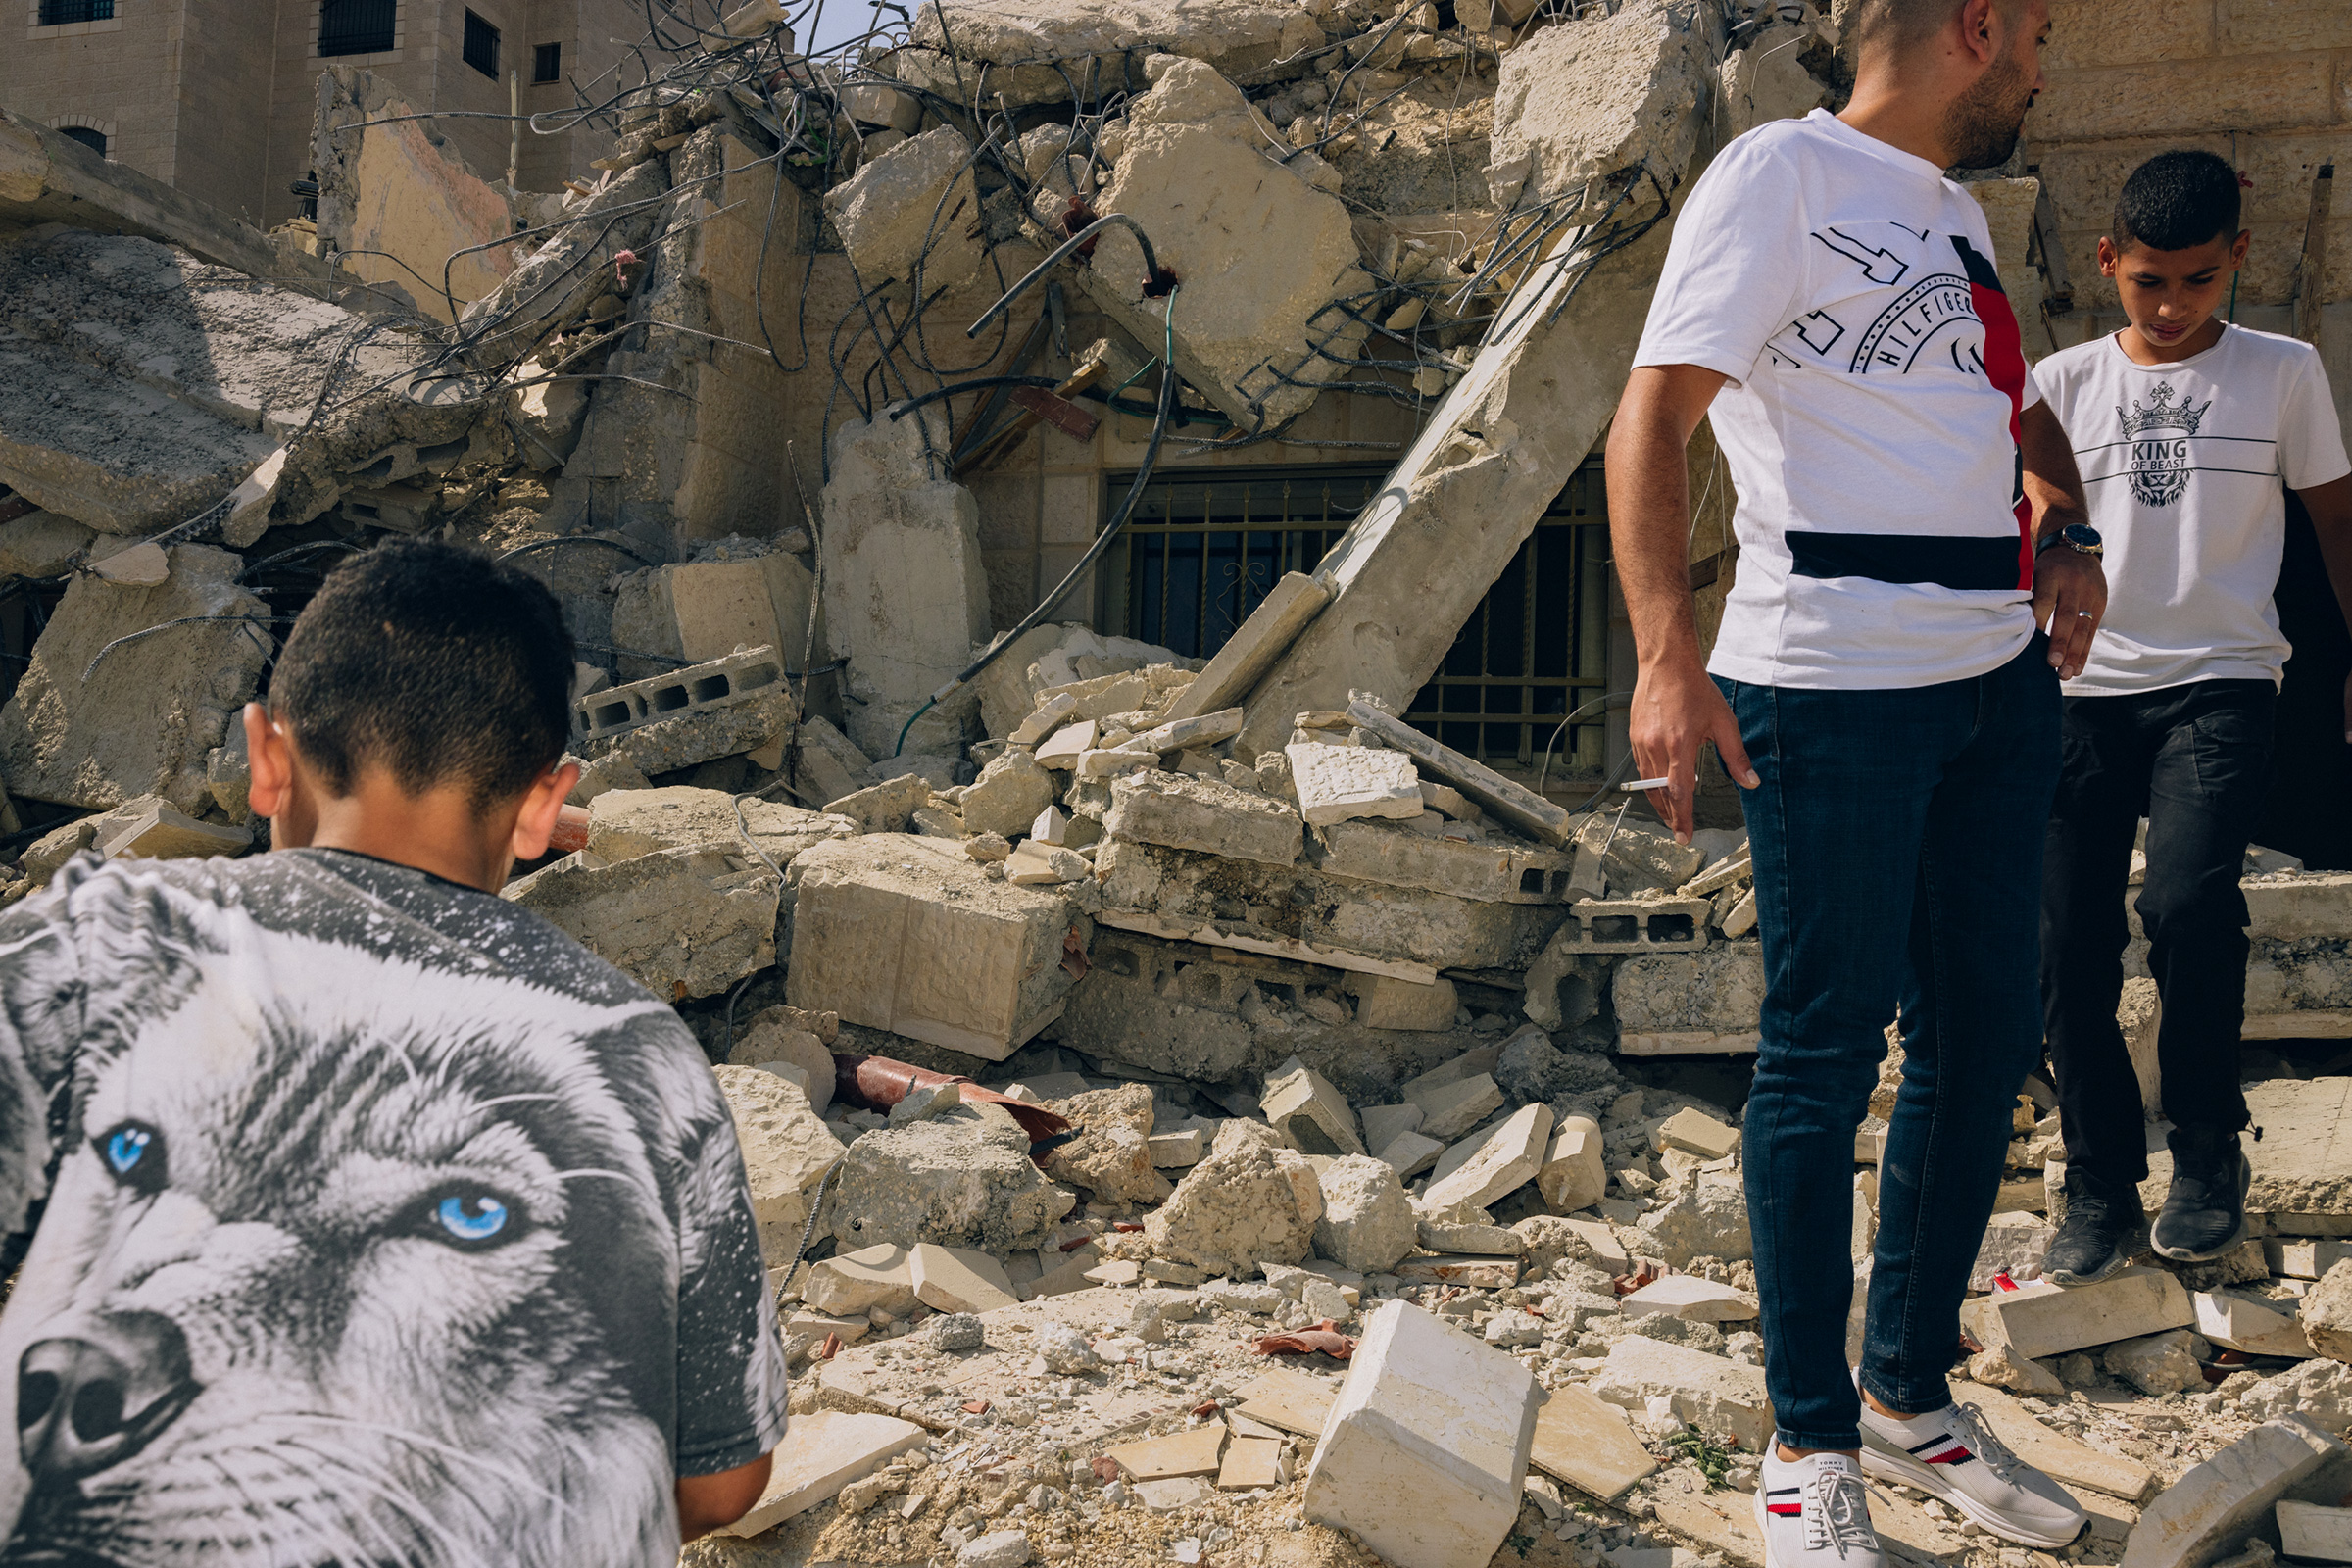 Neighbors in the Jalazon Refugee Camp, near the West Bank city of Ramallah, help members of the Nakhle family retrieve valuables that could be salvaged following the punitive home demolition of the six family home, on Oct. 28.